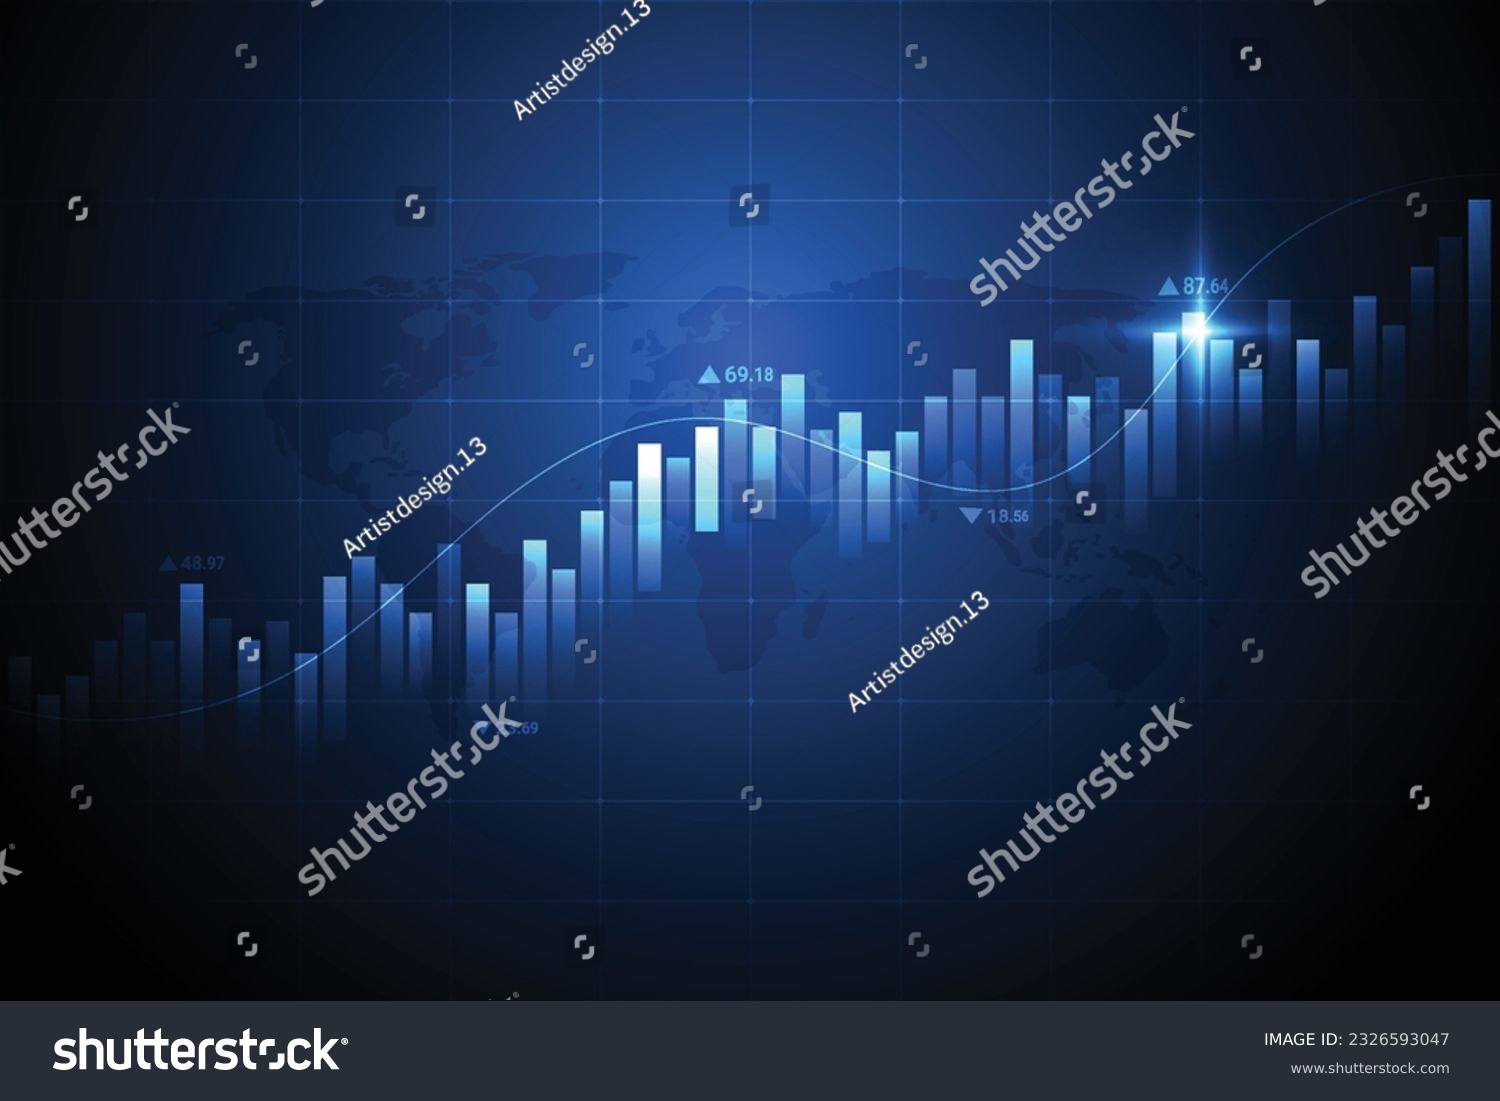 SVG of Business candle stick graph chart of stock market investment trading on white background design. Bullish point, Trend of graph. Vector illustration svg